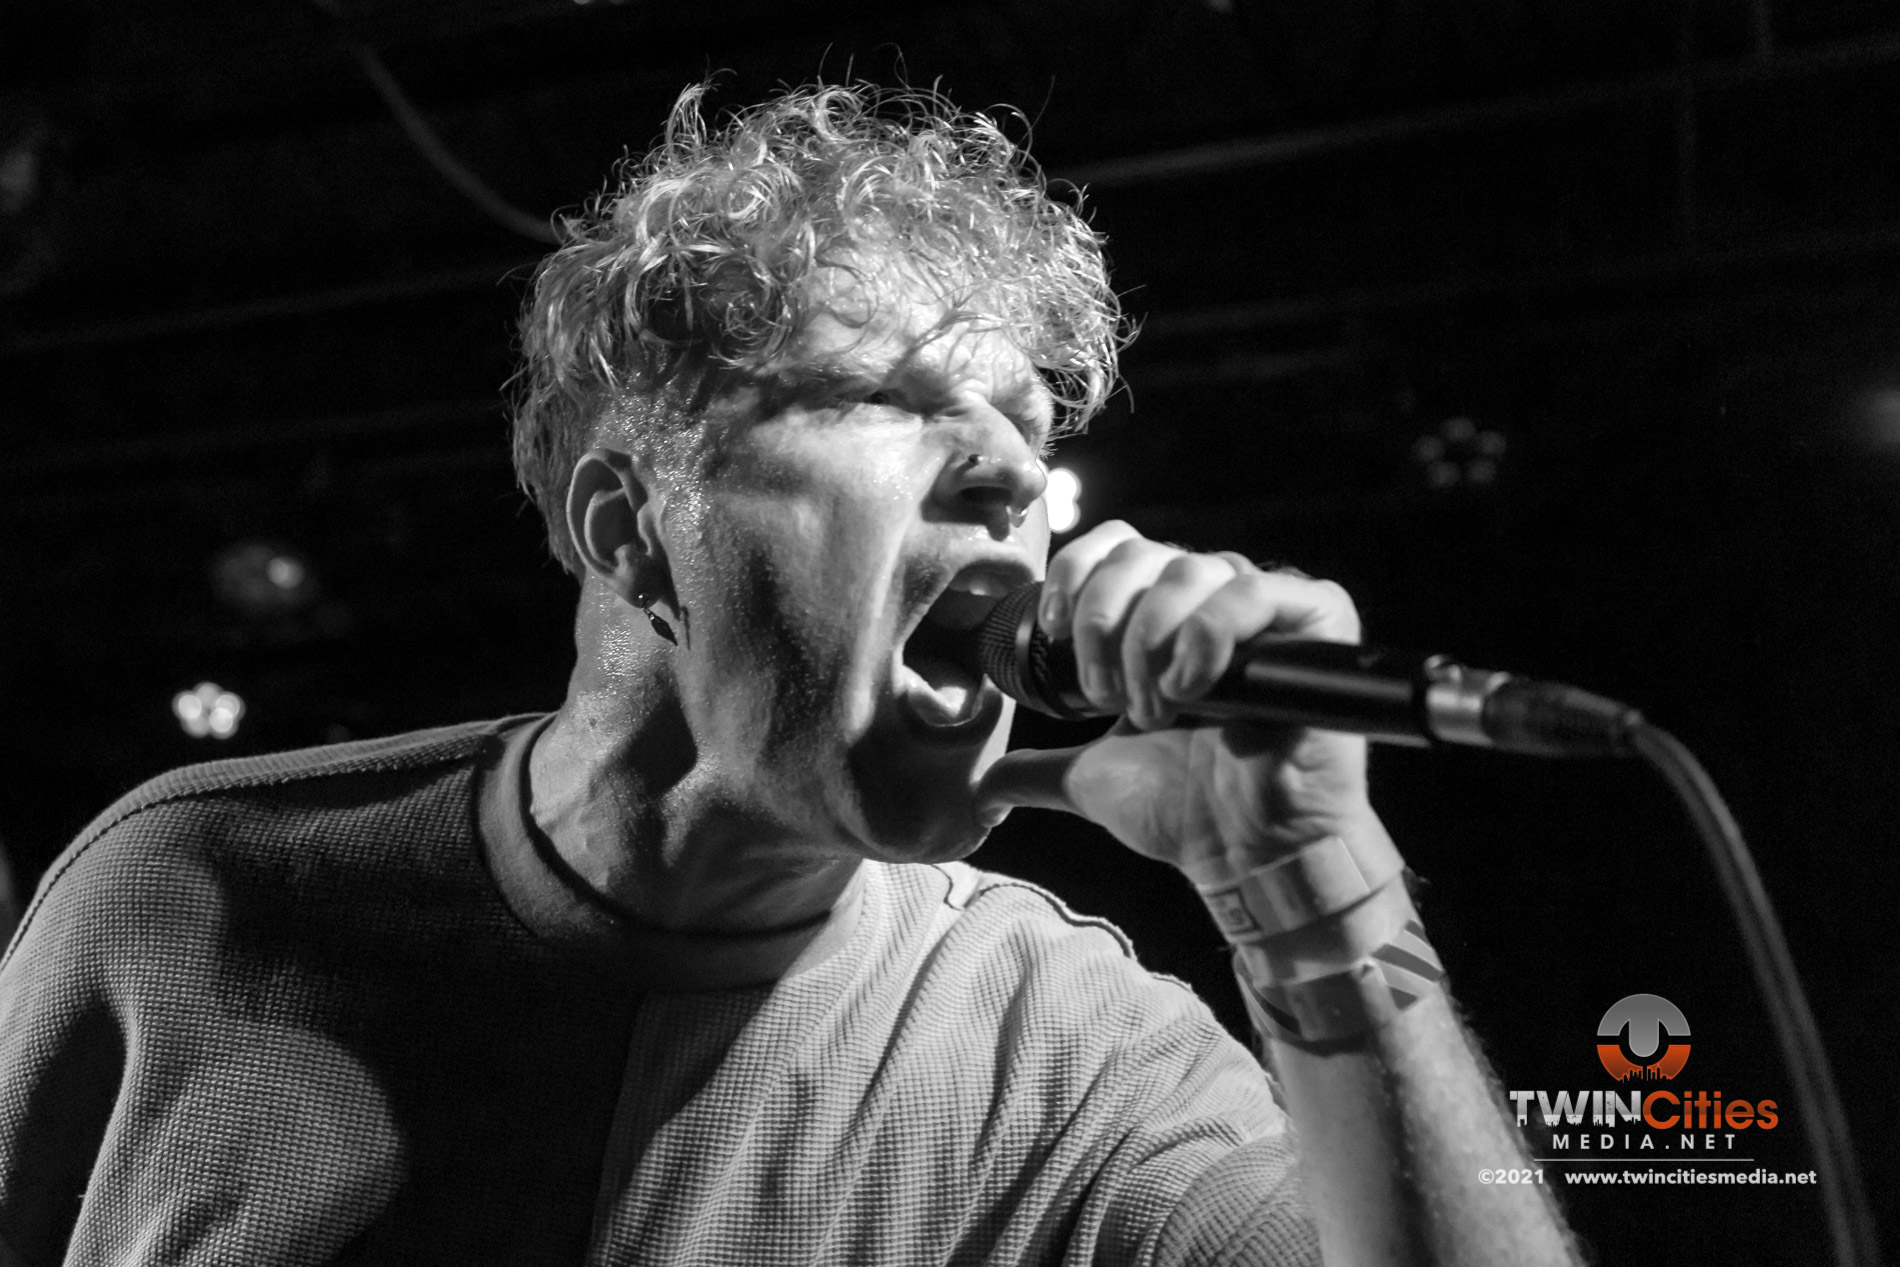 August 5, 2021 - Minneapolis, Minnesota, United States - Careful Gaze live in concert at 7th Street Entry  opening for Coyote Kid.

(Photo by Seth Steffenhagen/Steffenhagen Photography)